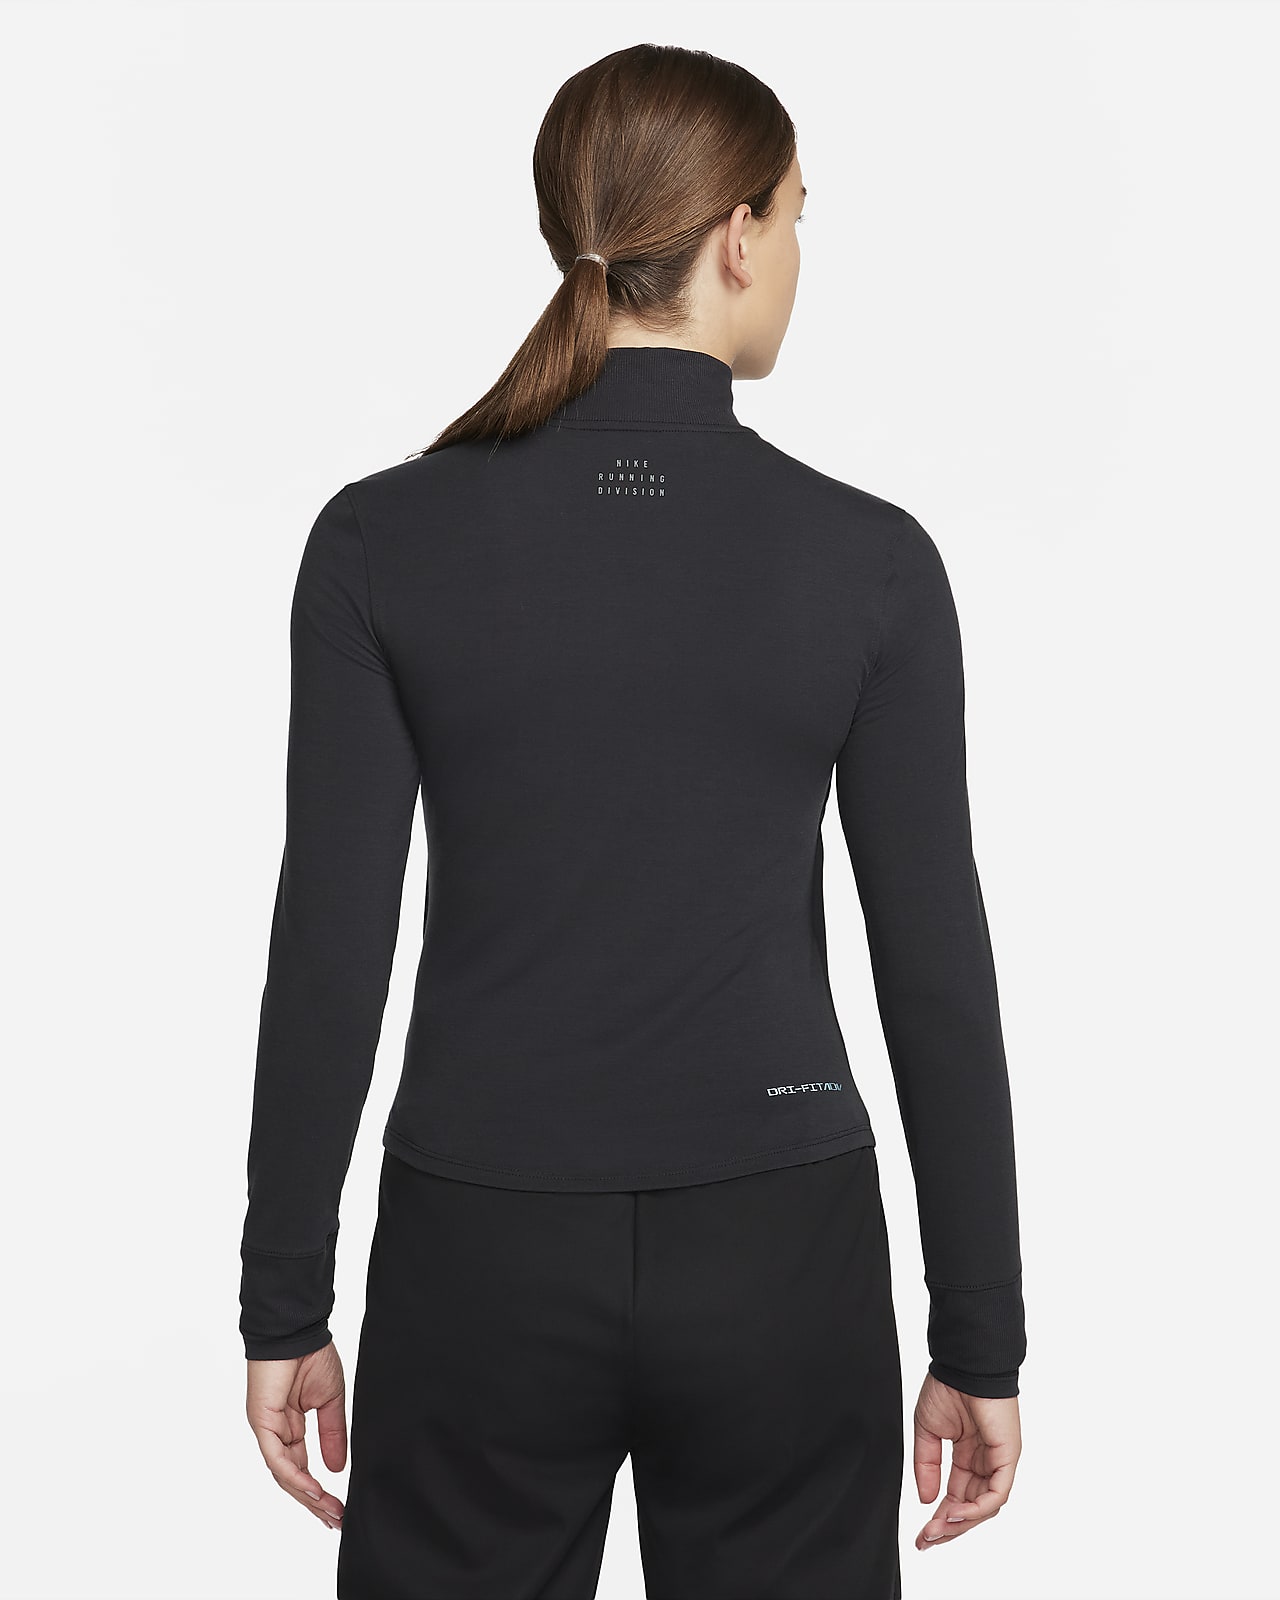 Nike Dri-Fit Running Quarter Zip Long Sleeve Athletic Top Women's Size Small